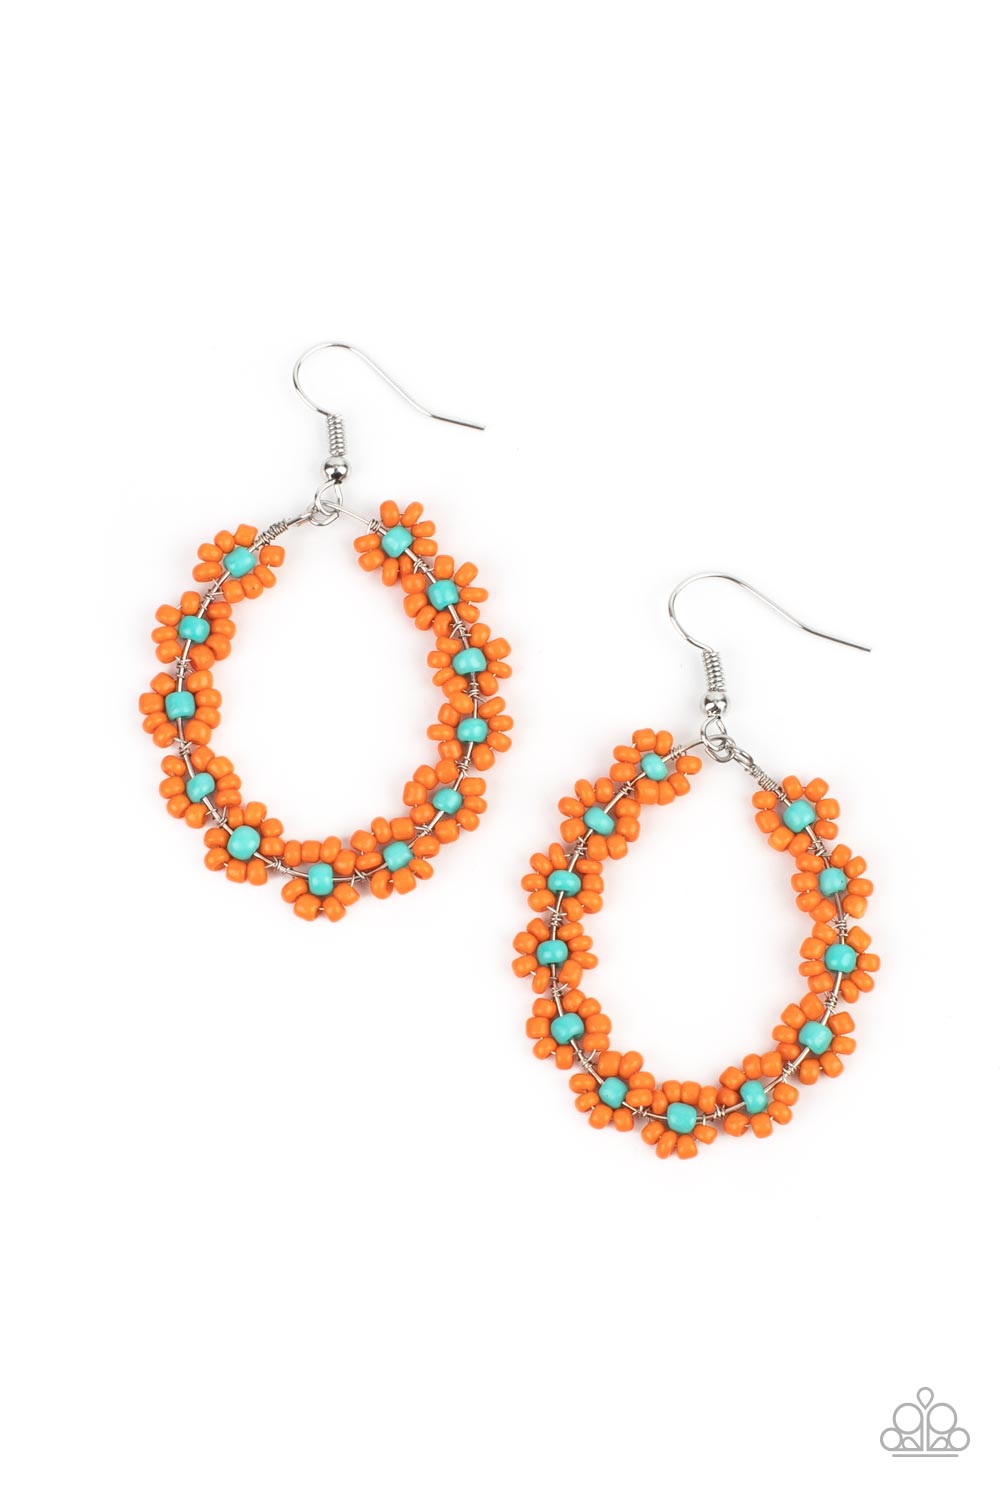 Festively Flower Child - Orange - Blue Seed Bead Earrings - Paparazzi Accessories - Dotted with turquoise beaded centers, a dainty collection of orange seed beaded floral frames are threaded along a wire hoop for a fabulous floral fashion.